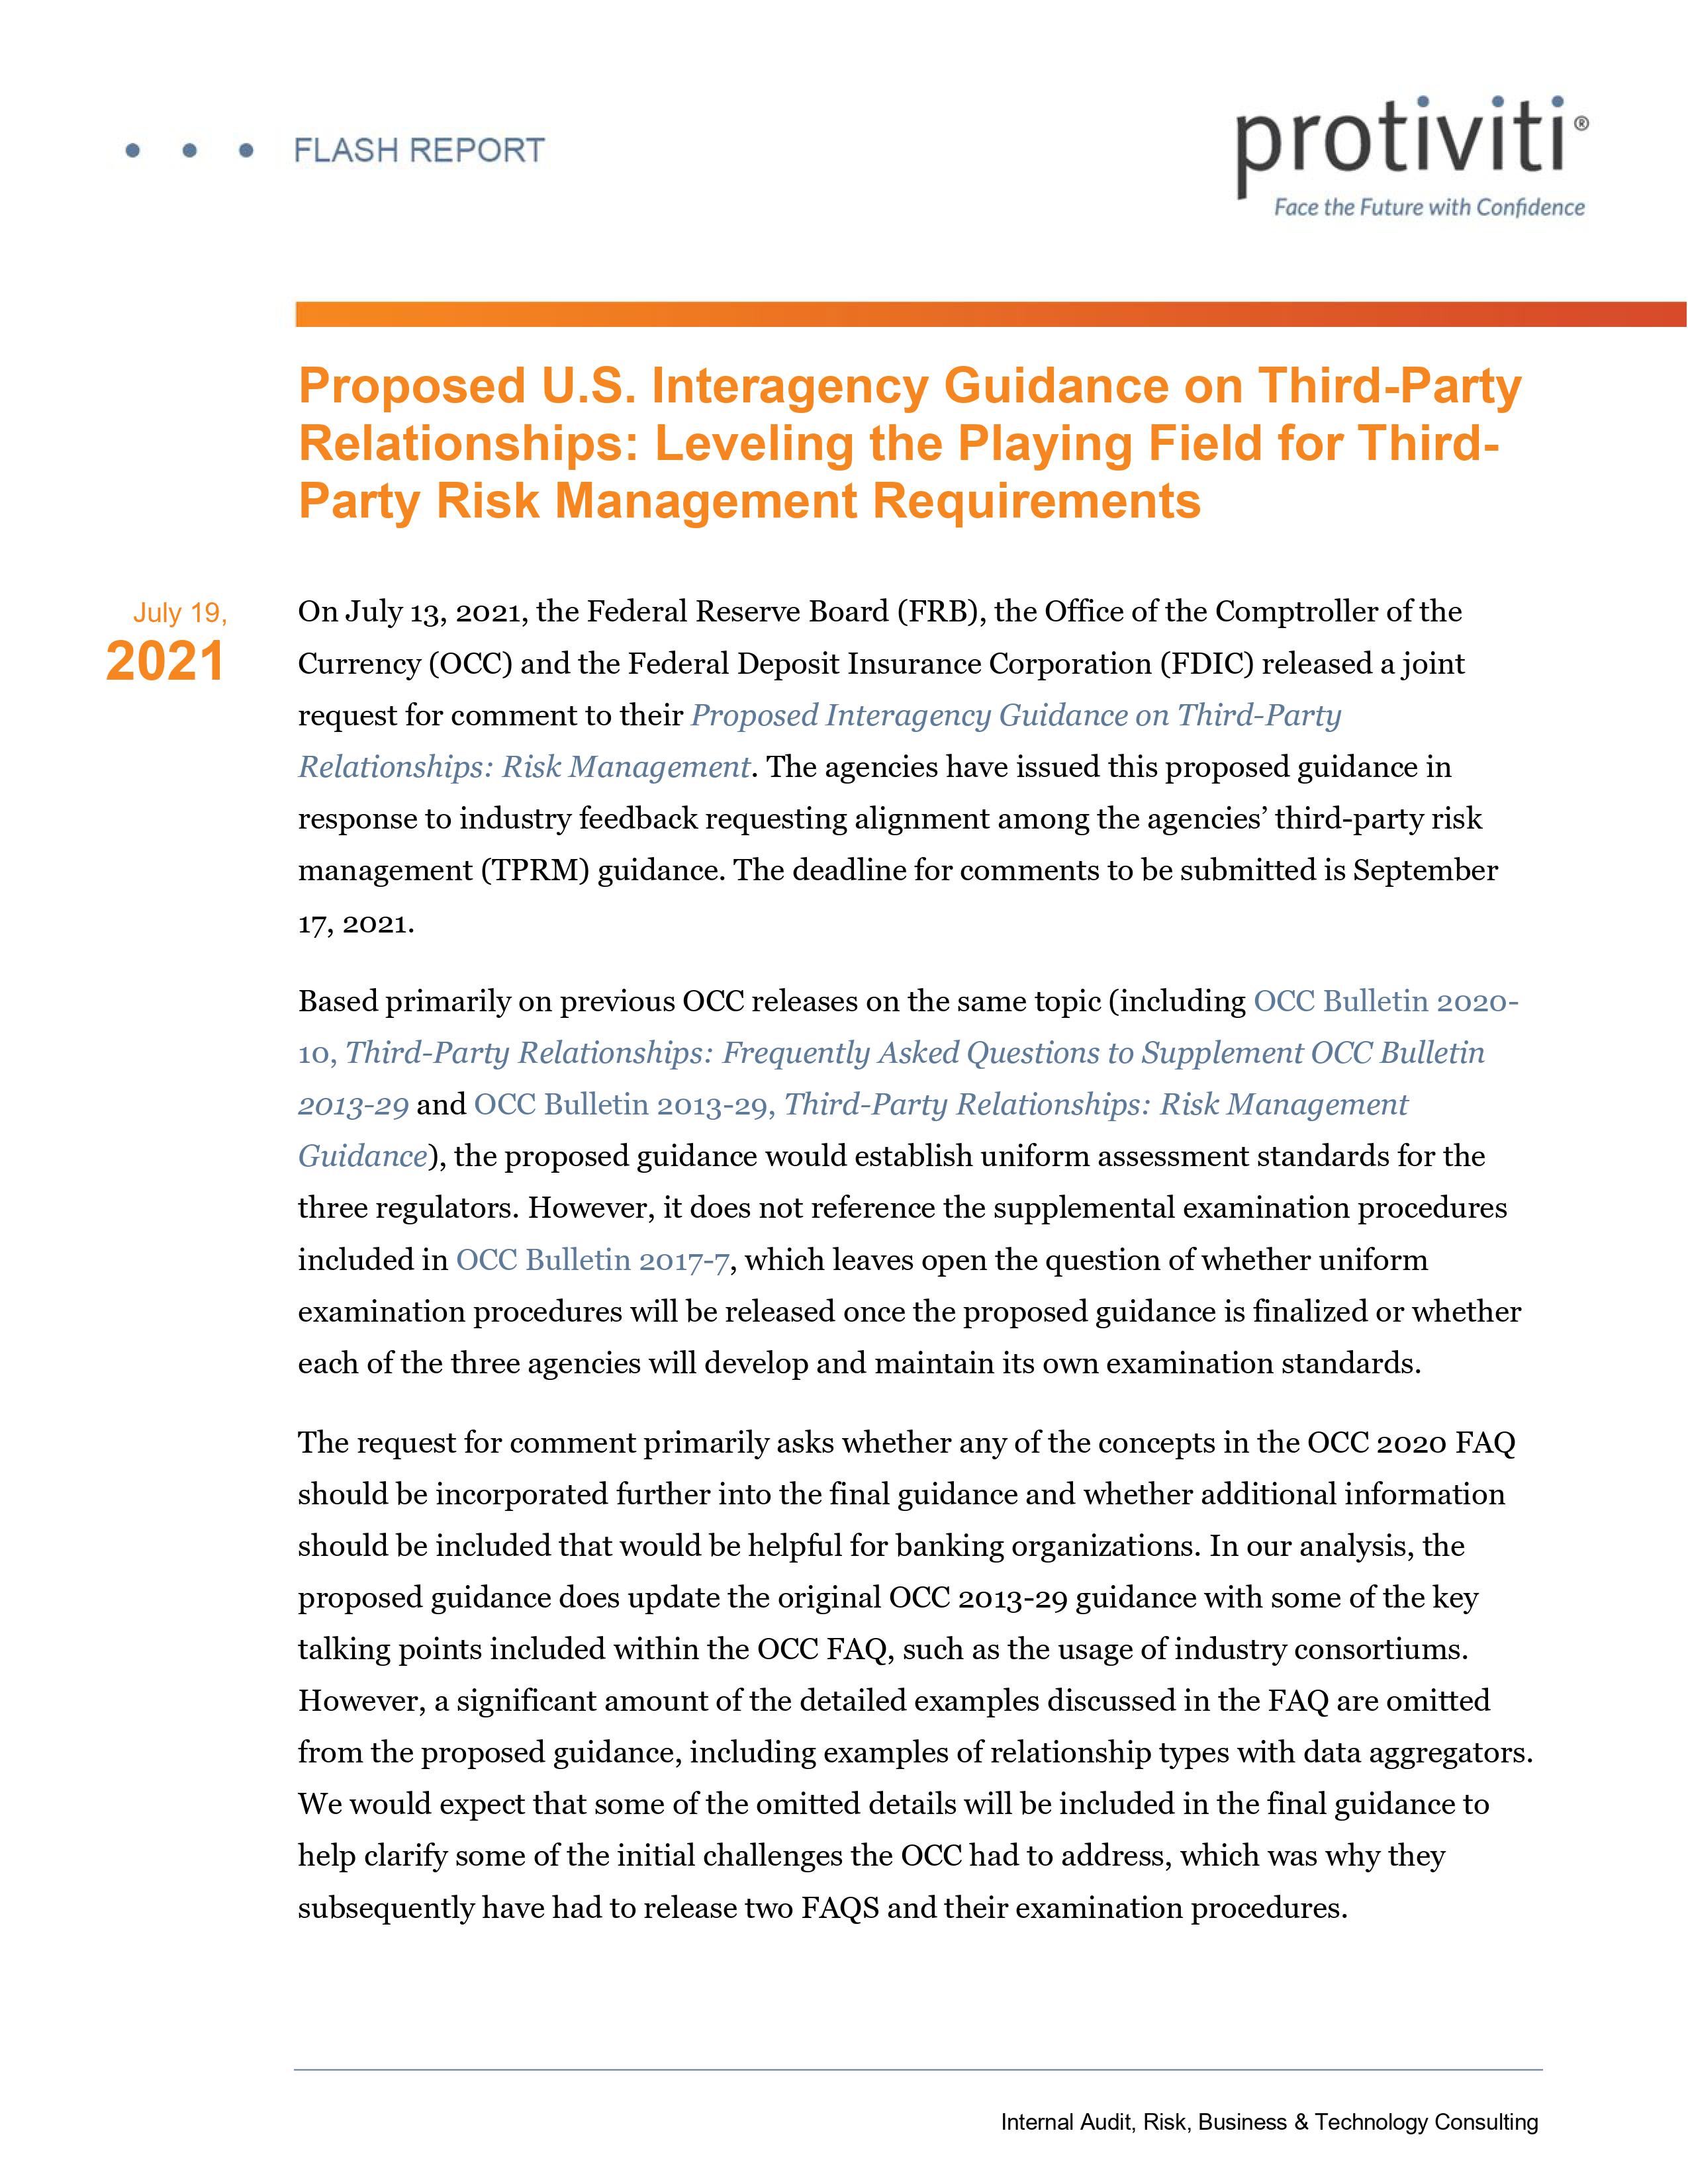 Screenshot of the first page of Proposed U.S. Interagency Guidance on Third-Party Relationships Leveling the Playing Field for Third-Party Management Requirements